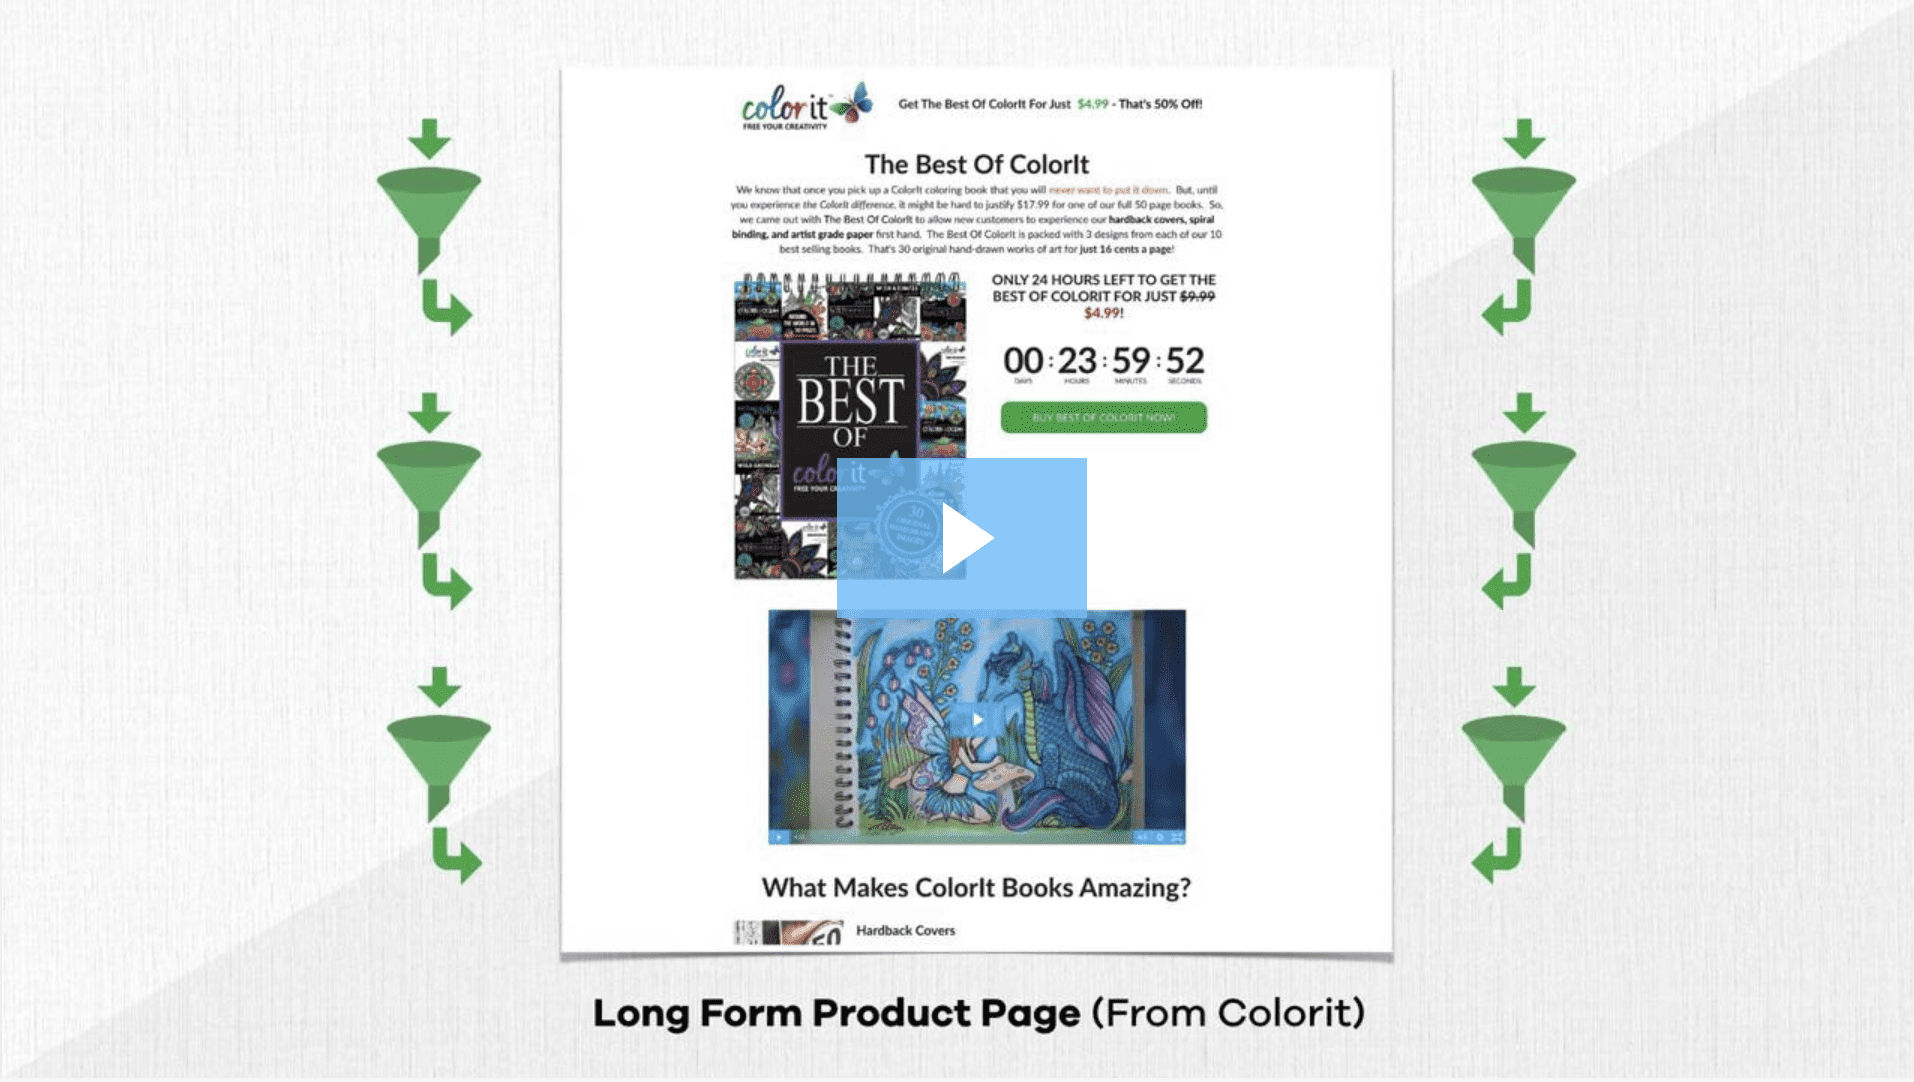 Long form product page from ColorIt